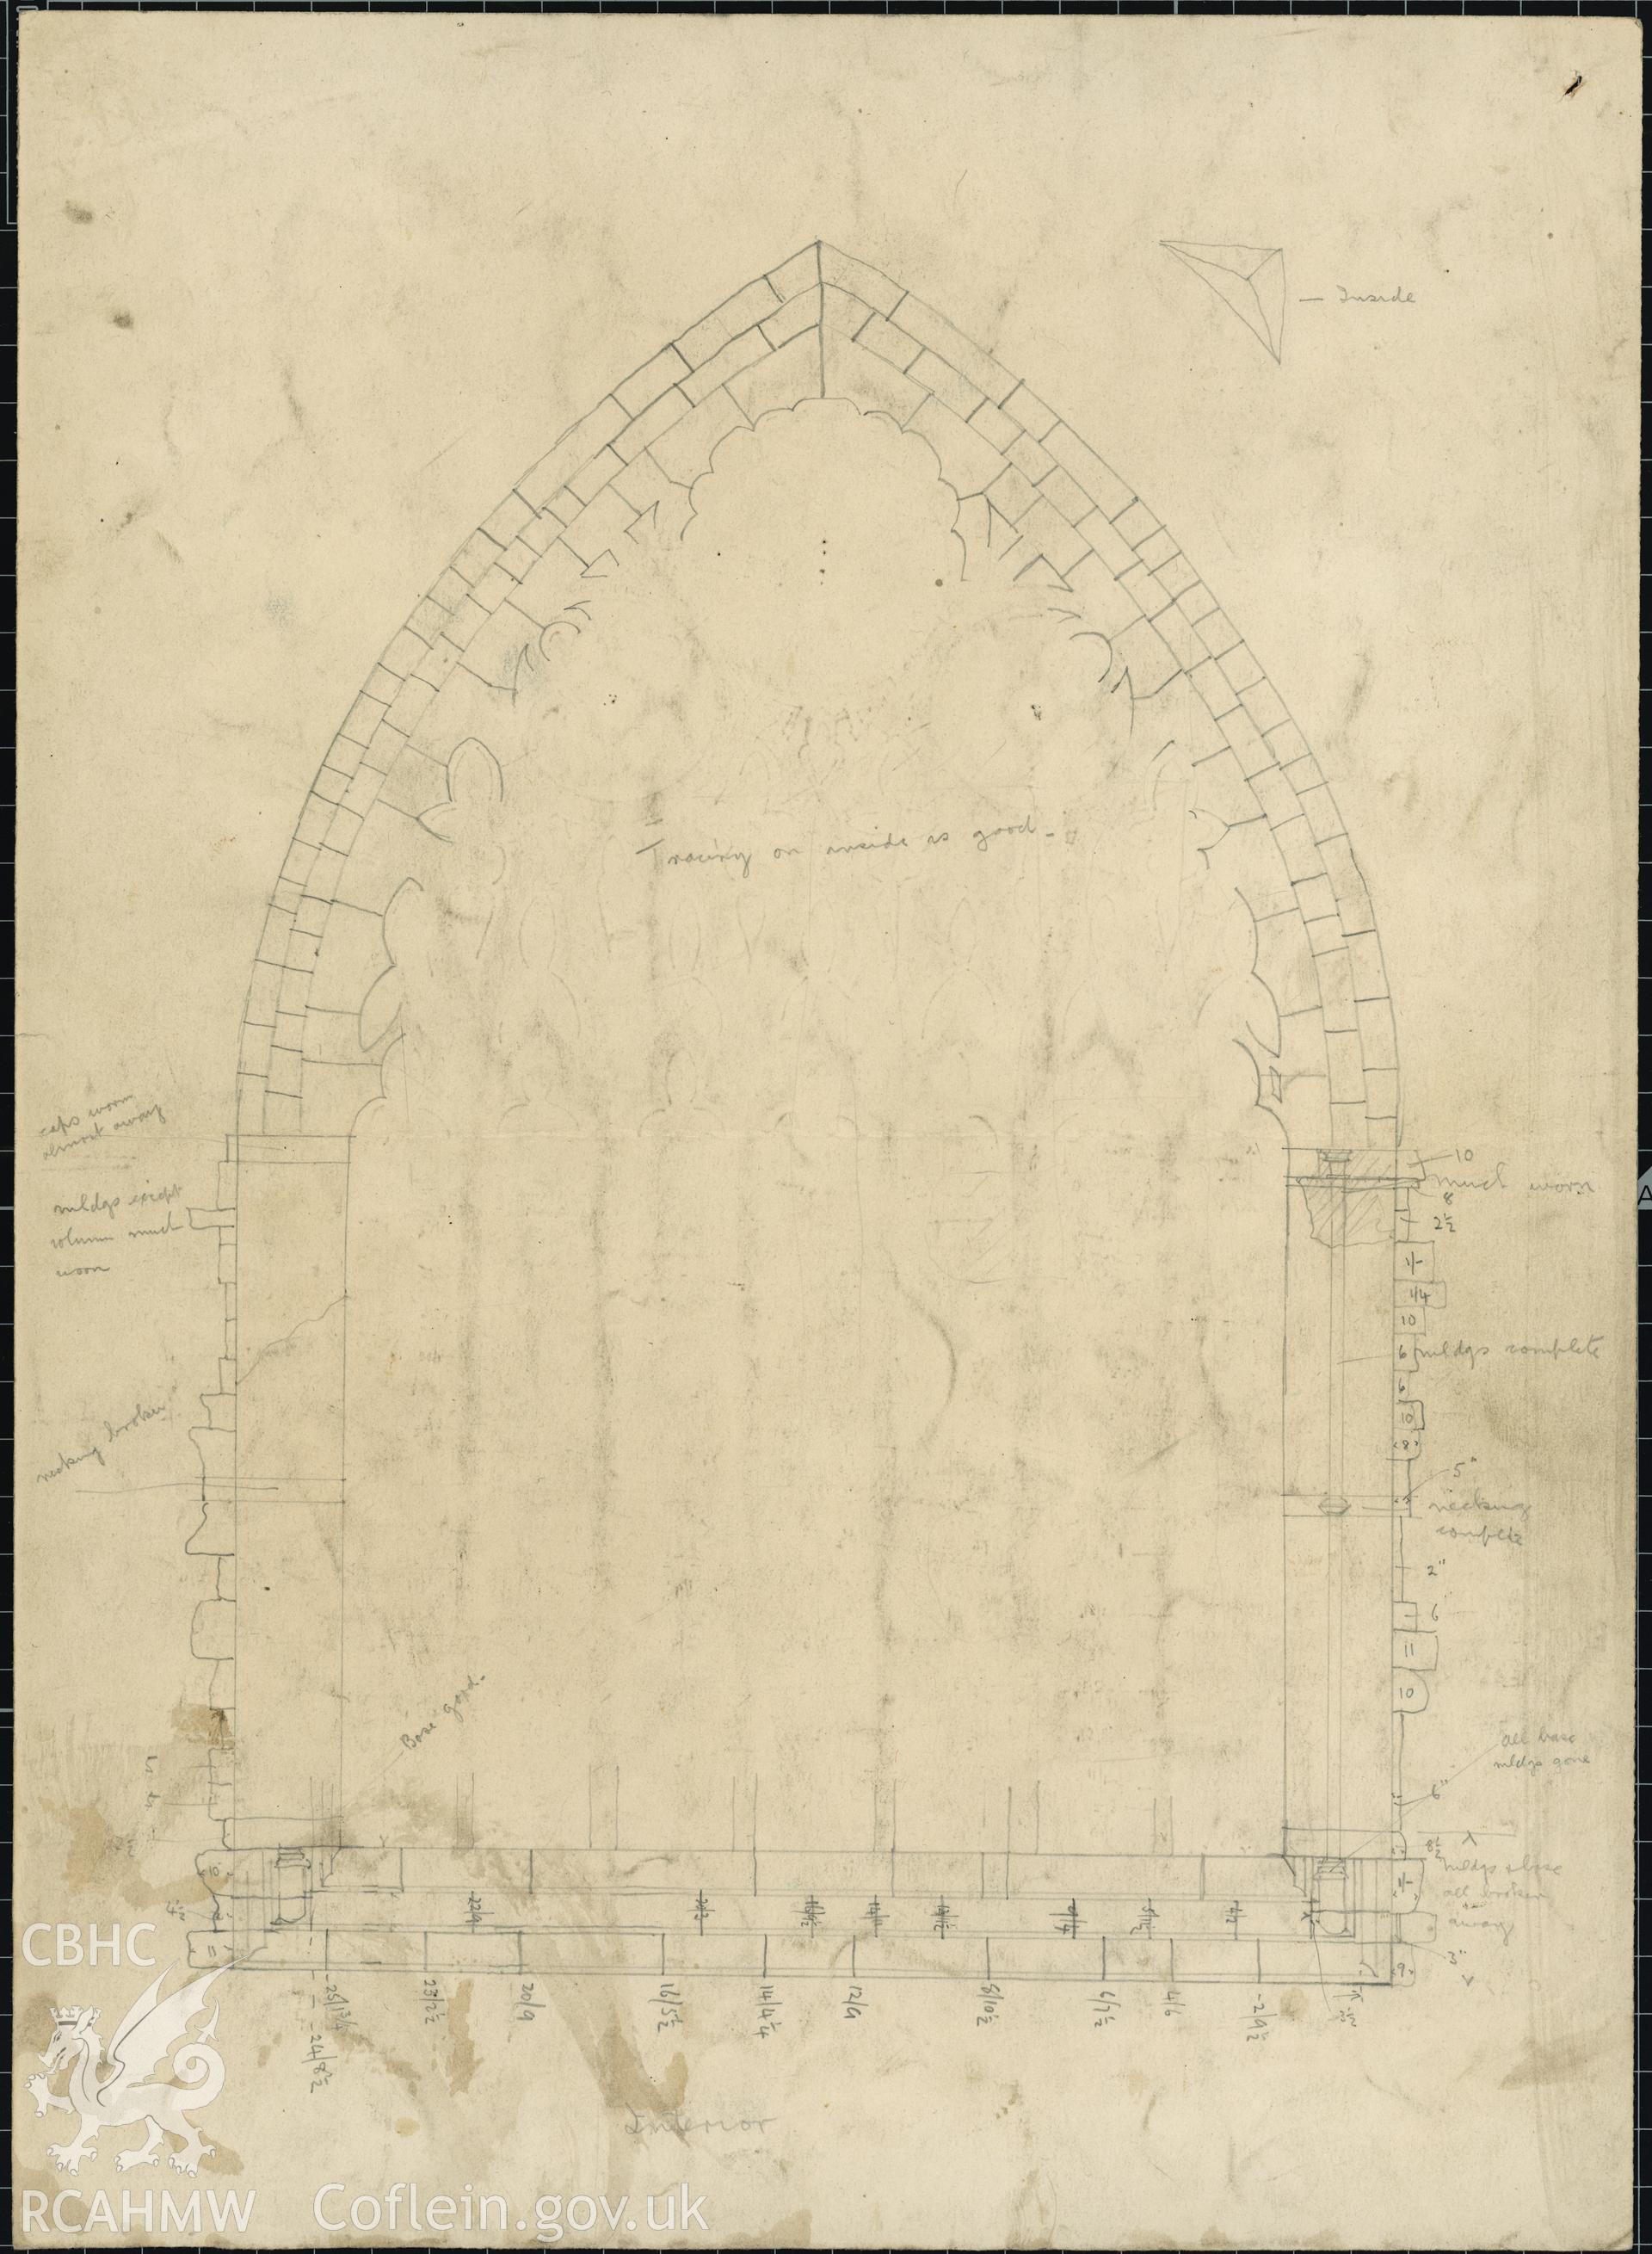 Digital copy of Cadw guardianship monument drawing of Tintern Abbey, colour-wash measured drawing of exterior of west window, with incomplete pencil sketch of interior on reverse.  Dated 16th October 1920.